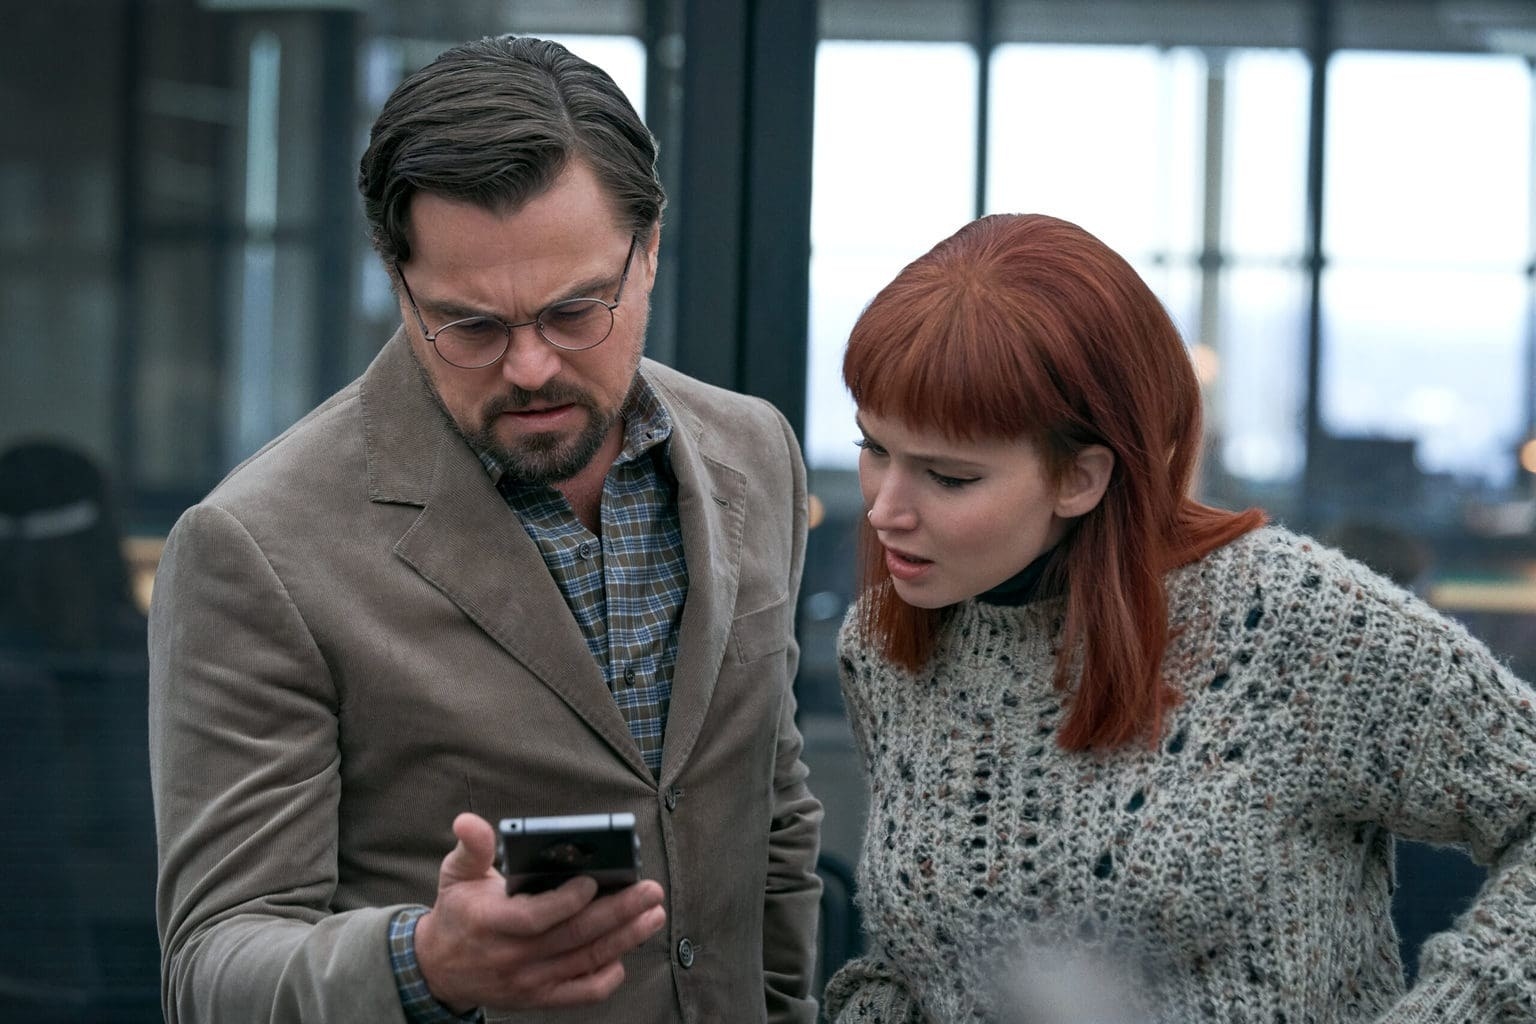 Randall and Kate looking at their phones